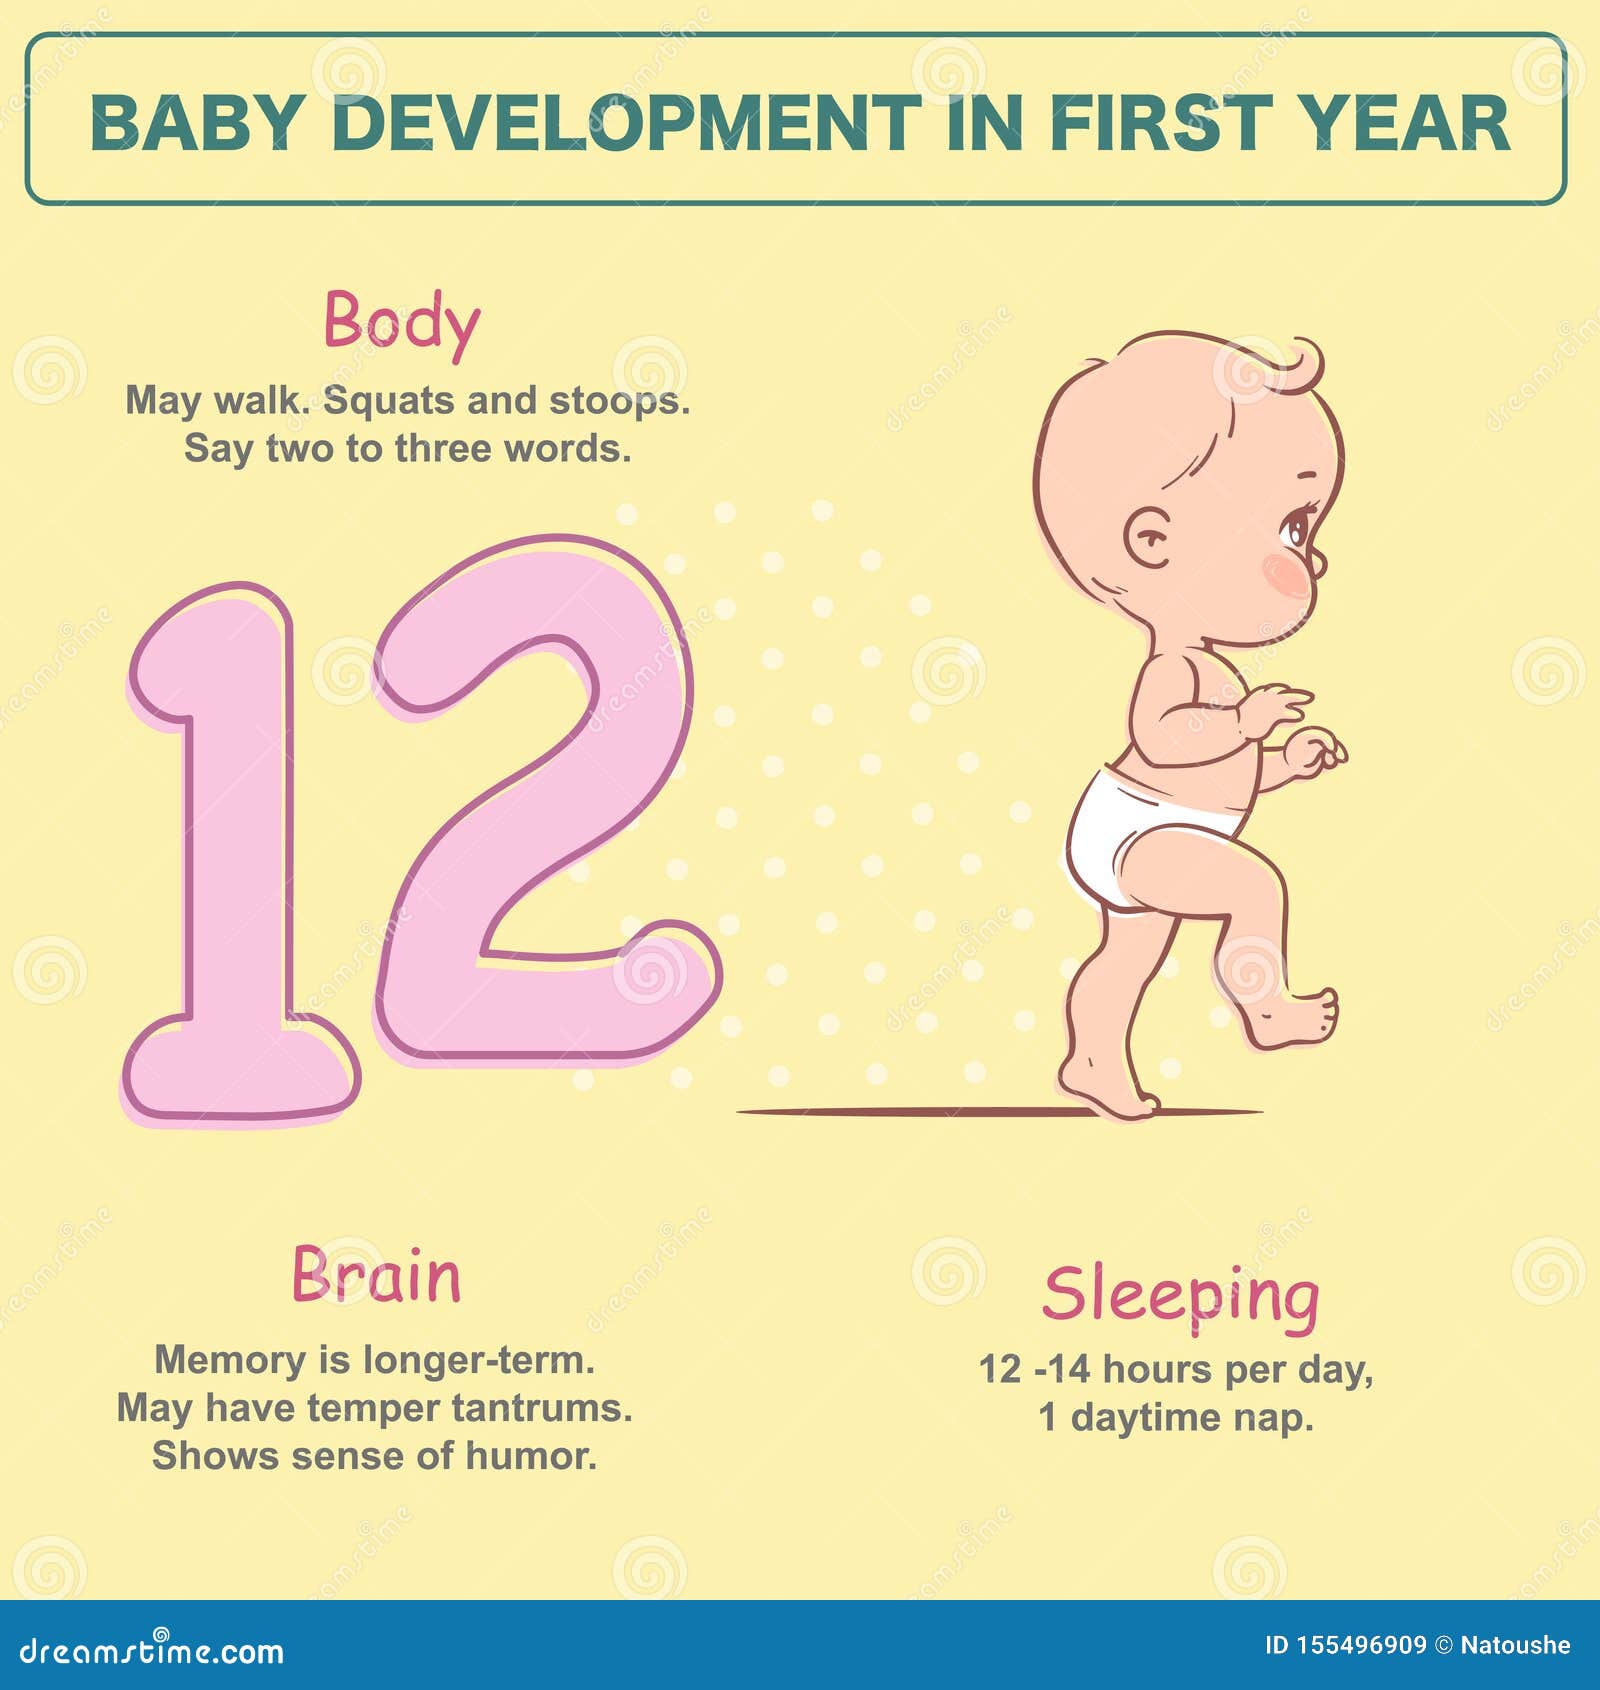 Baby Development 12 Months Activities: How to Help Your Baby Grow and Learn